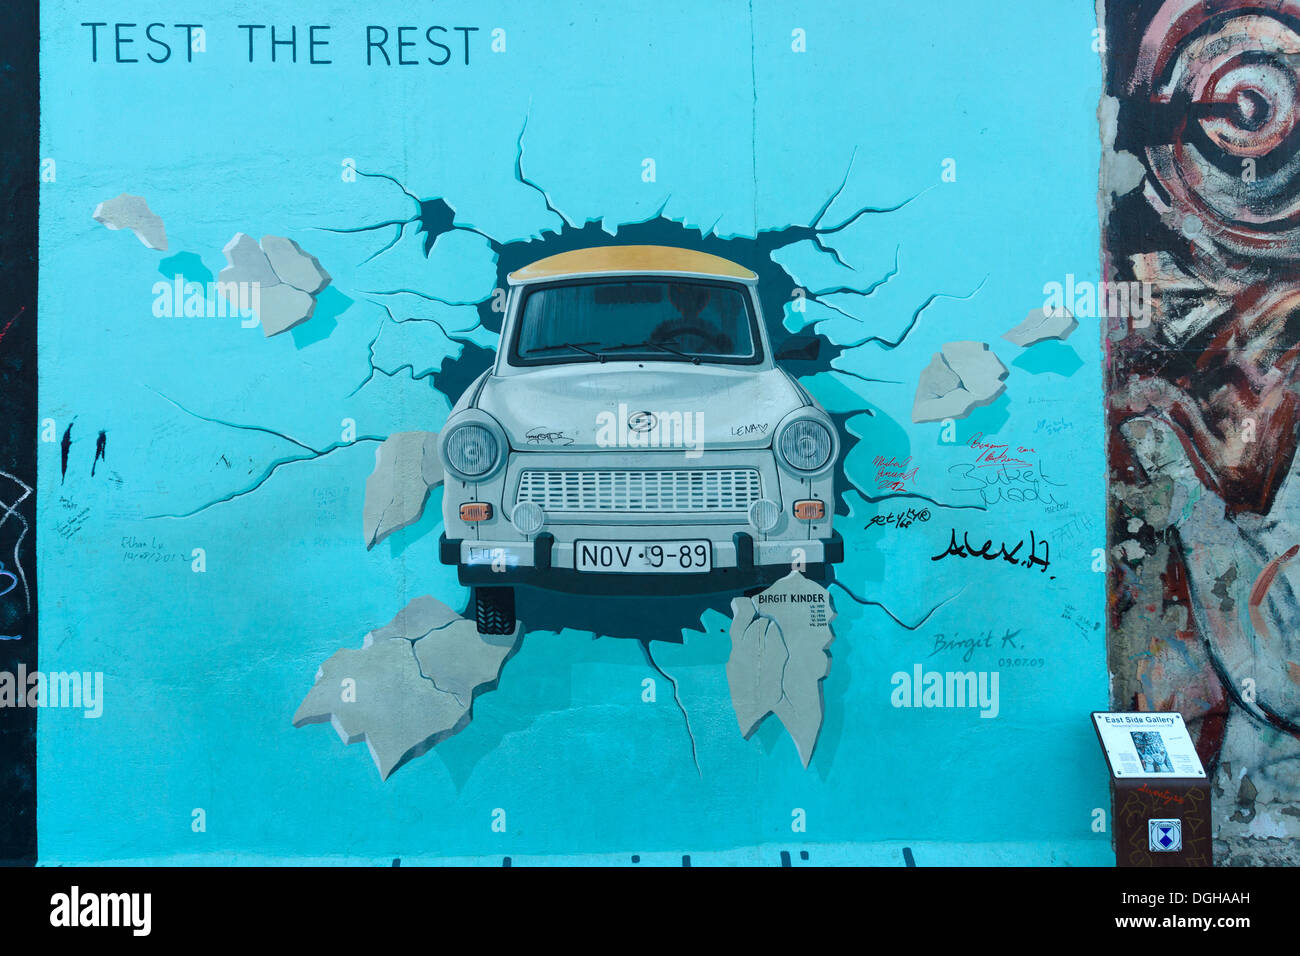 East Side Gallery. Test the Best by Birgit Kinder Stock Photo